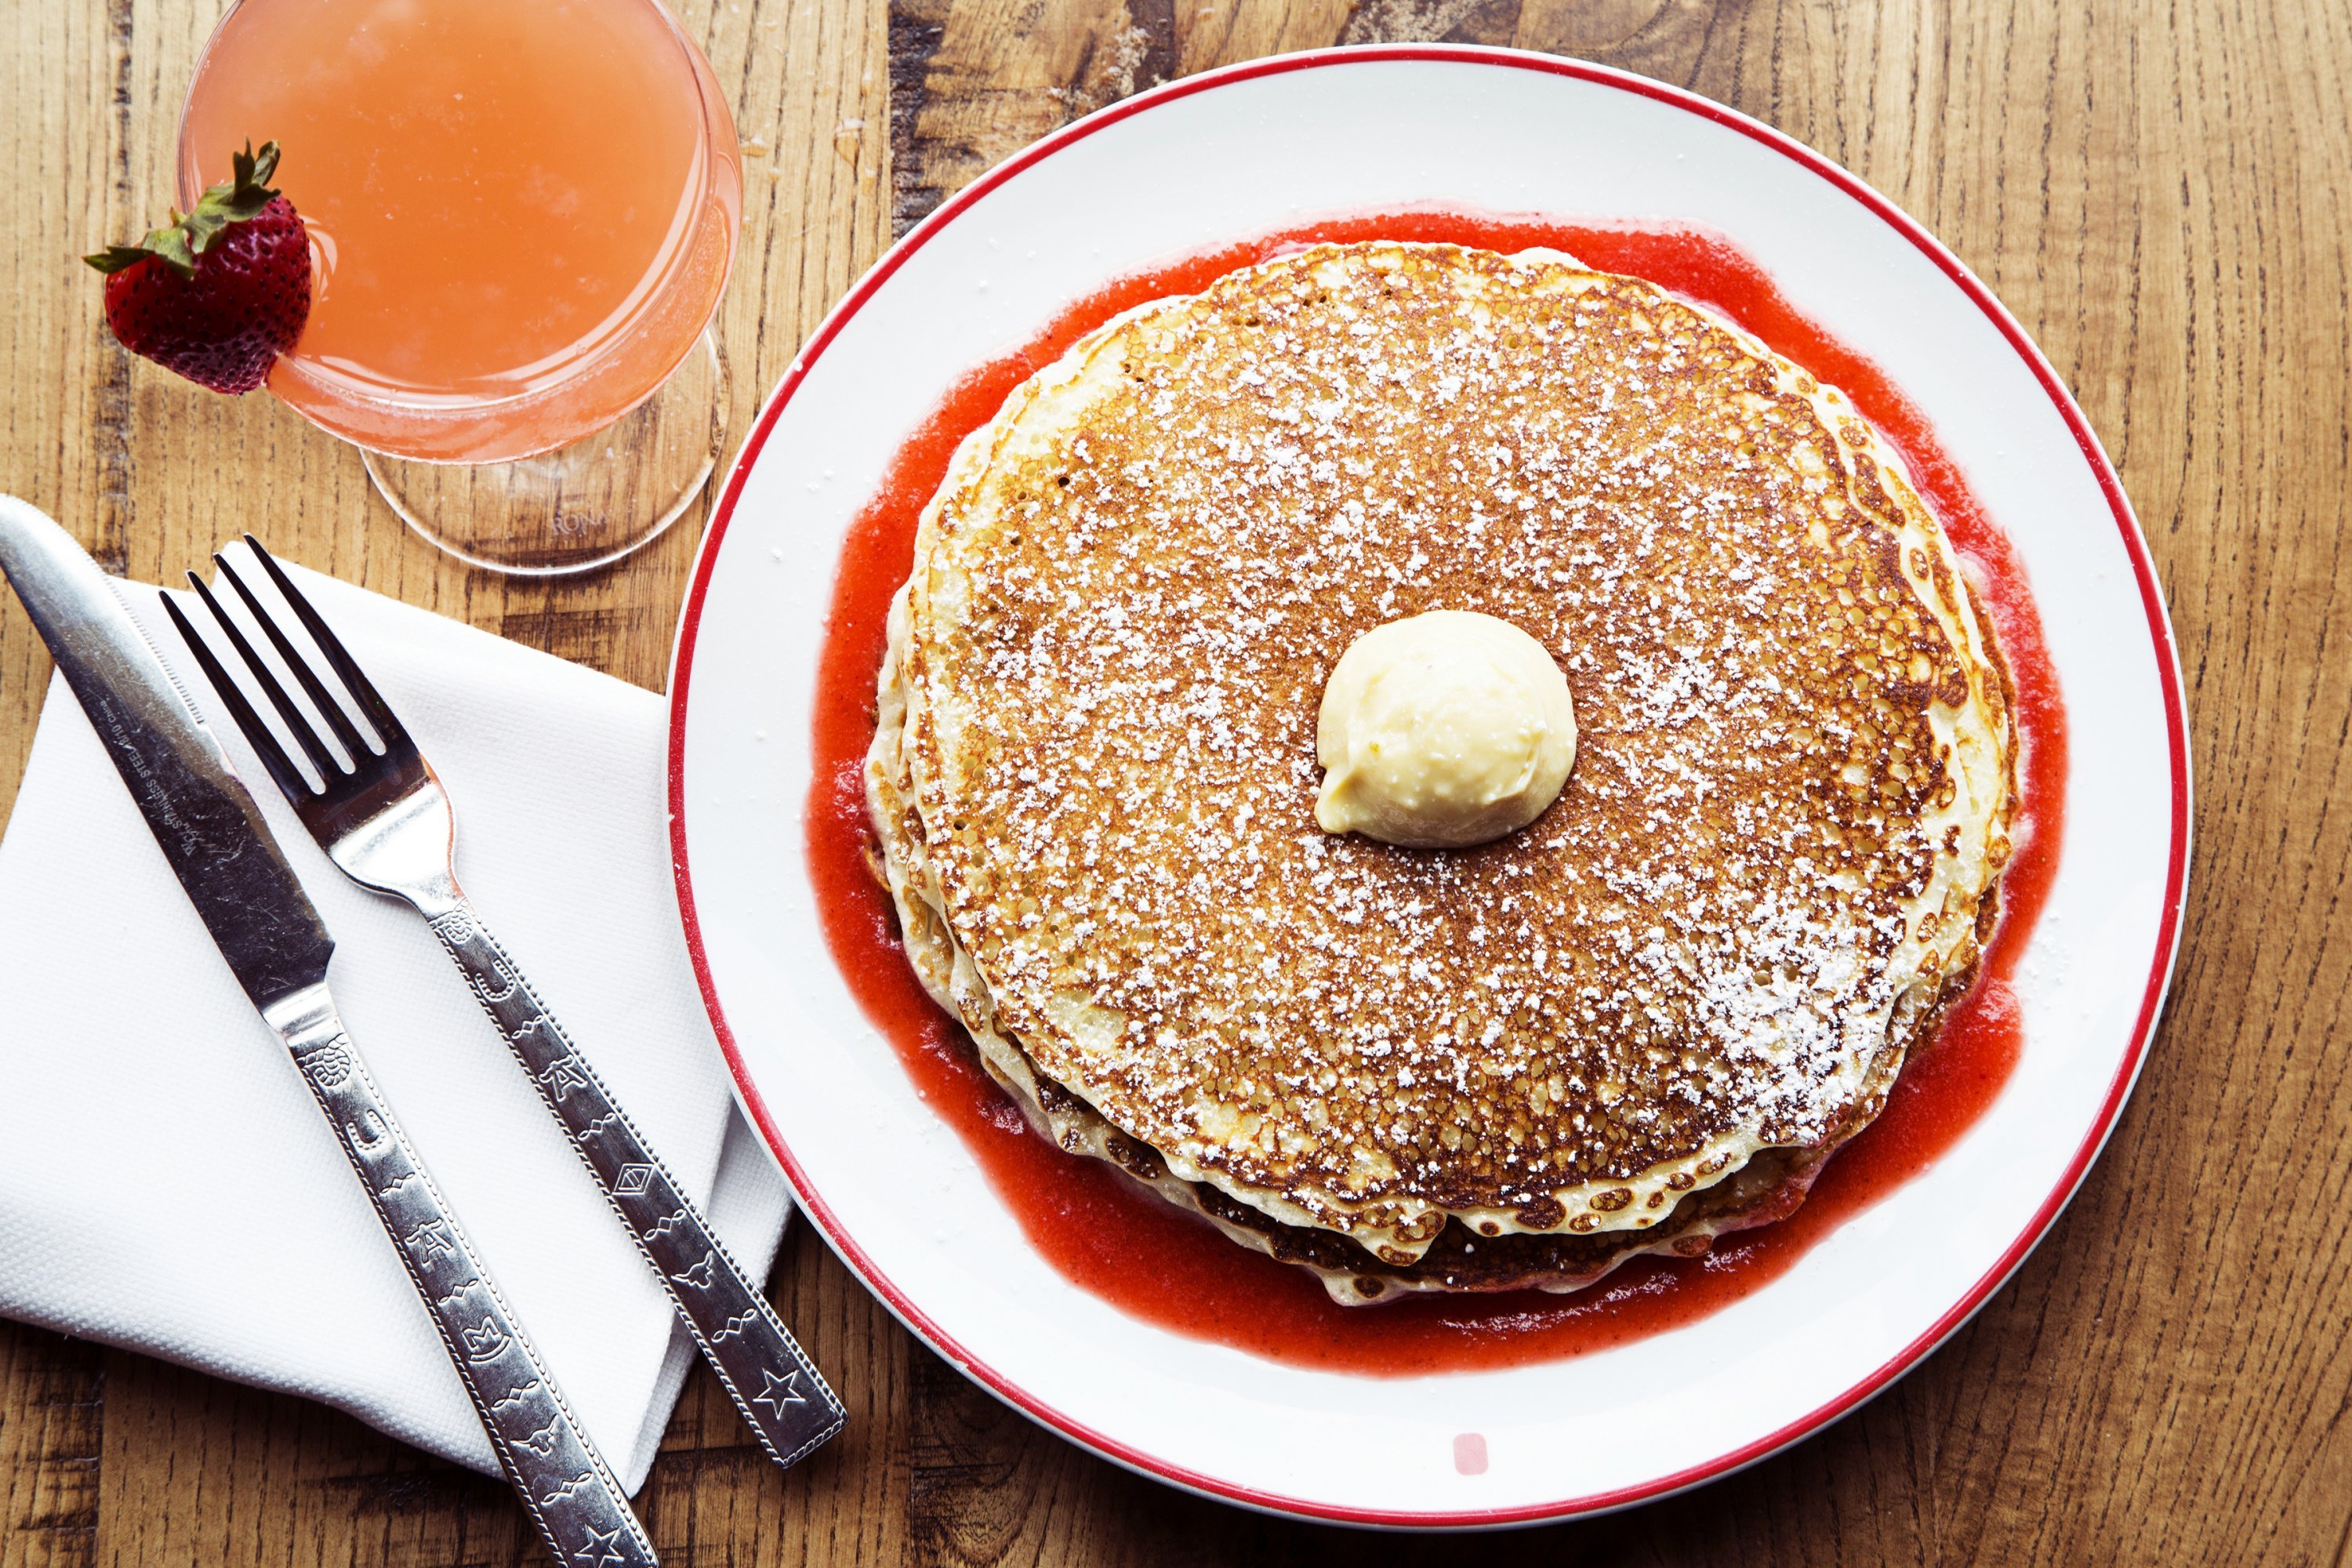 Pancakes at Founding Farmers. Photograph courtesy of Farmers Restaurant Group.